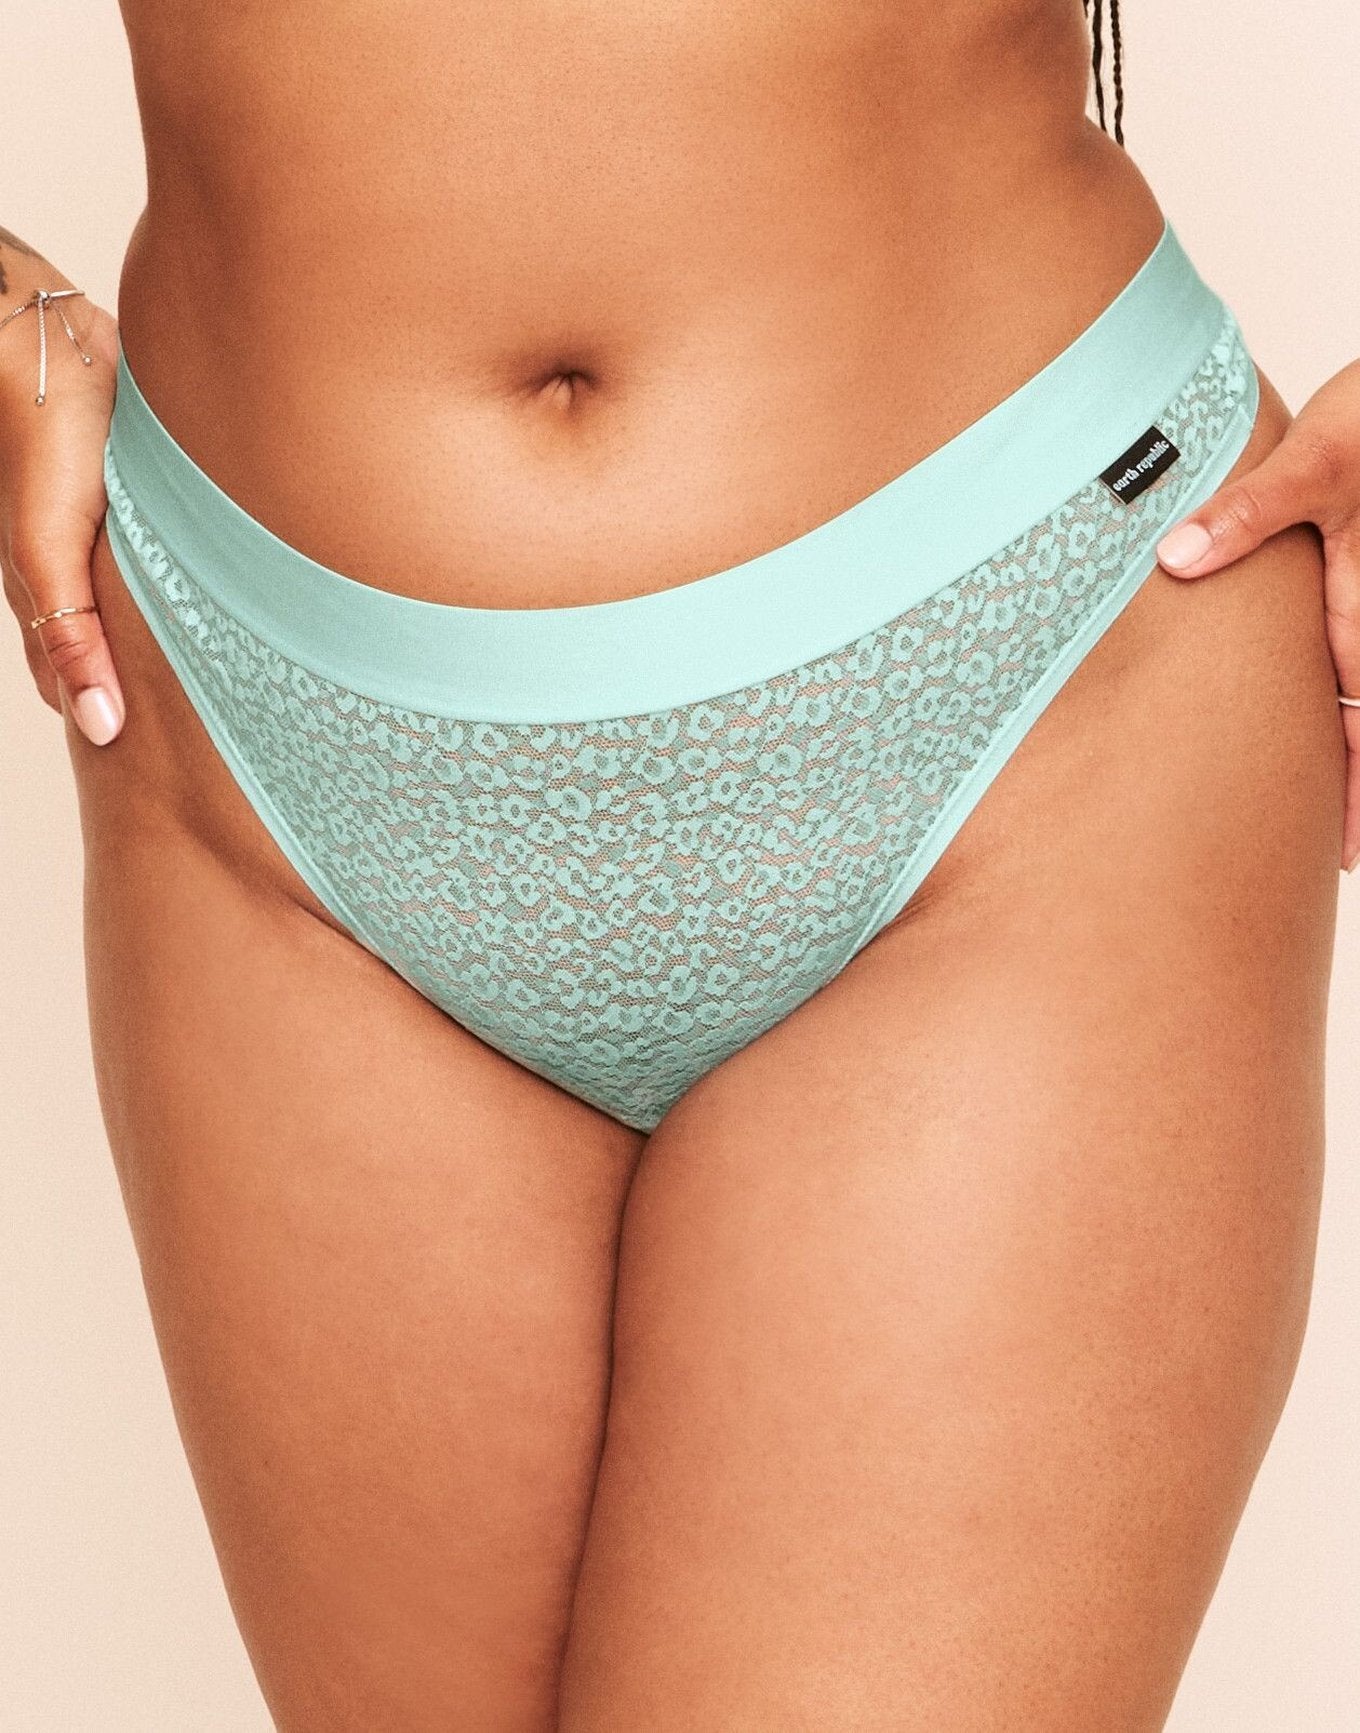 Earth Republic Ariya Lace Lace Thong in color Bay and shape thong